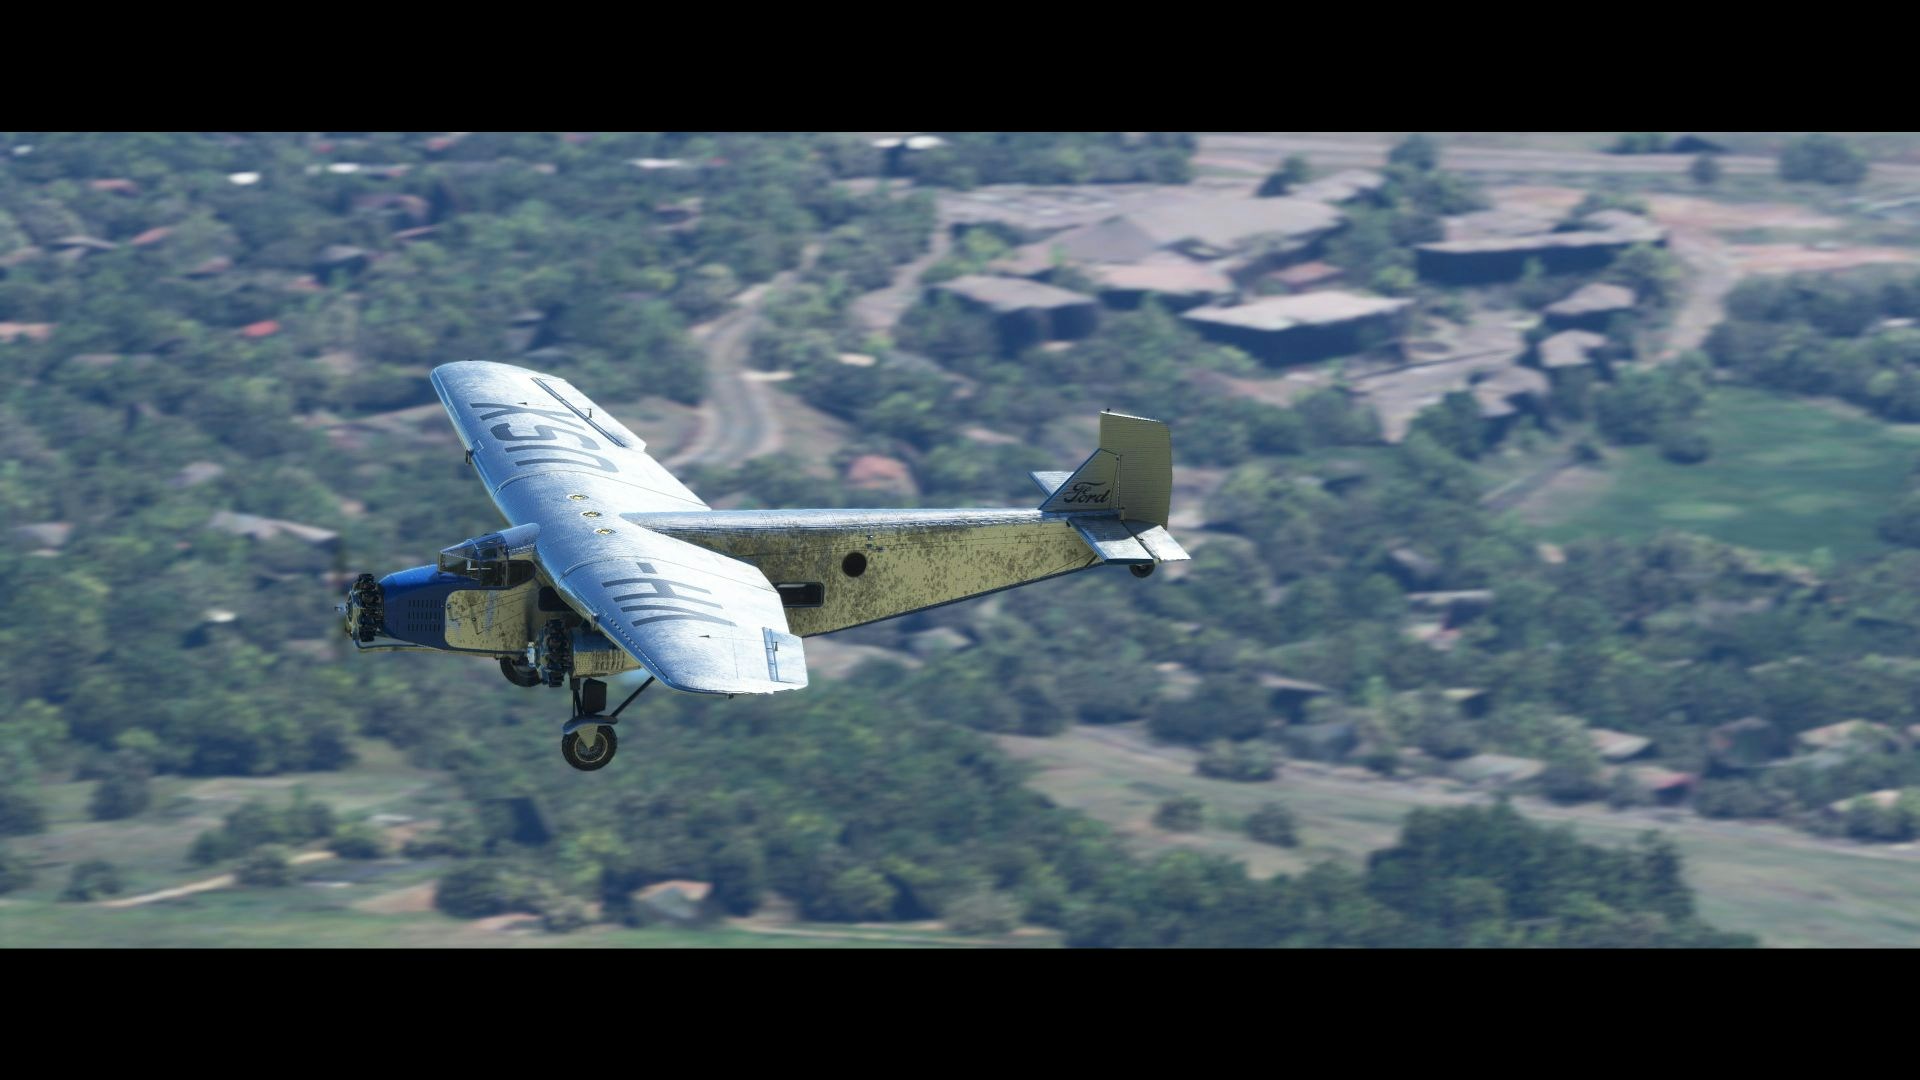 Microsoft Flight Simulator Releases Ford 4-AT Trimotor, Free for One Week